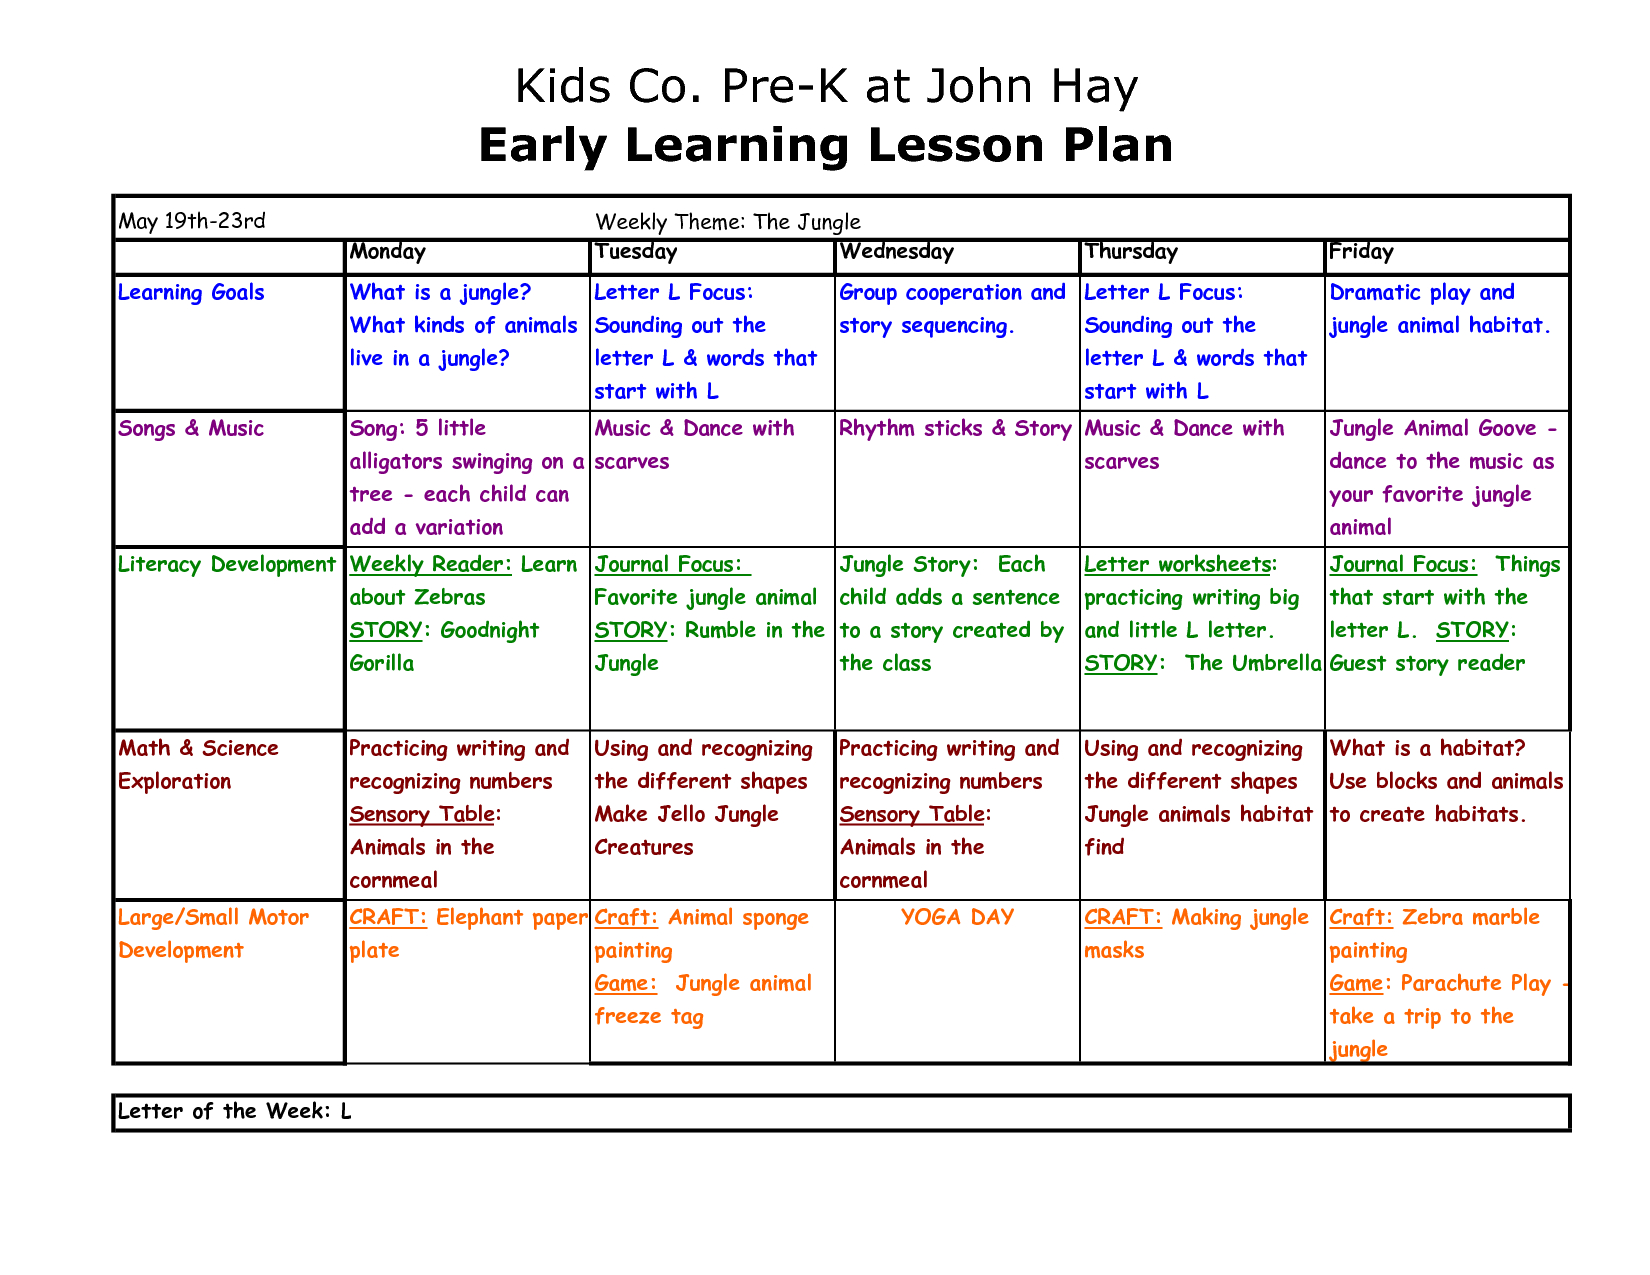 Preschool Lesson Plan Template | Copy Of Pre-K At John Hay Lesson - Free Printable Lesson Plans For Toddlers